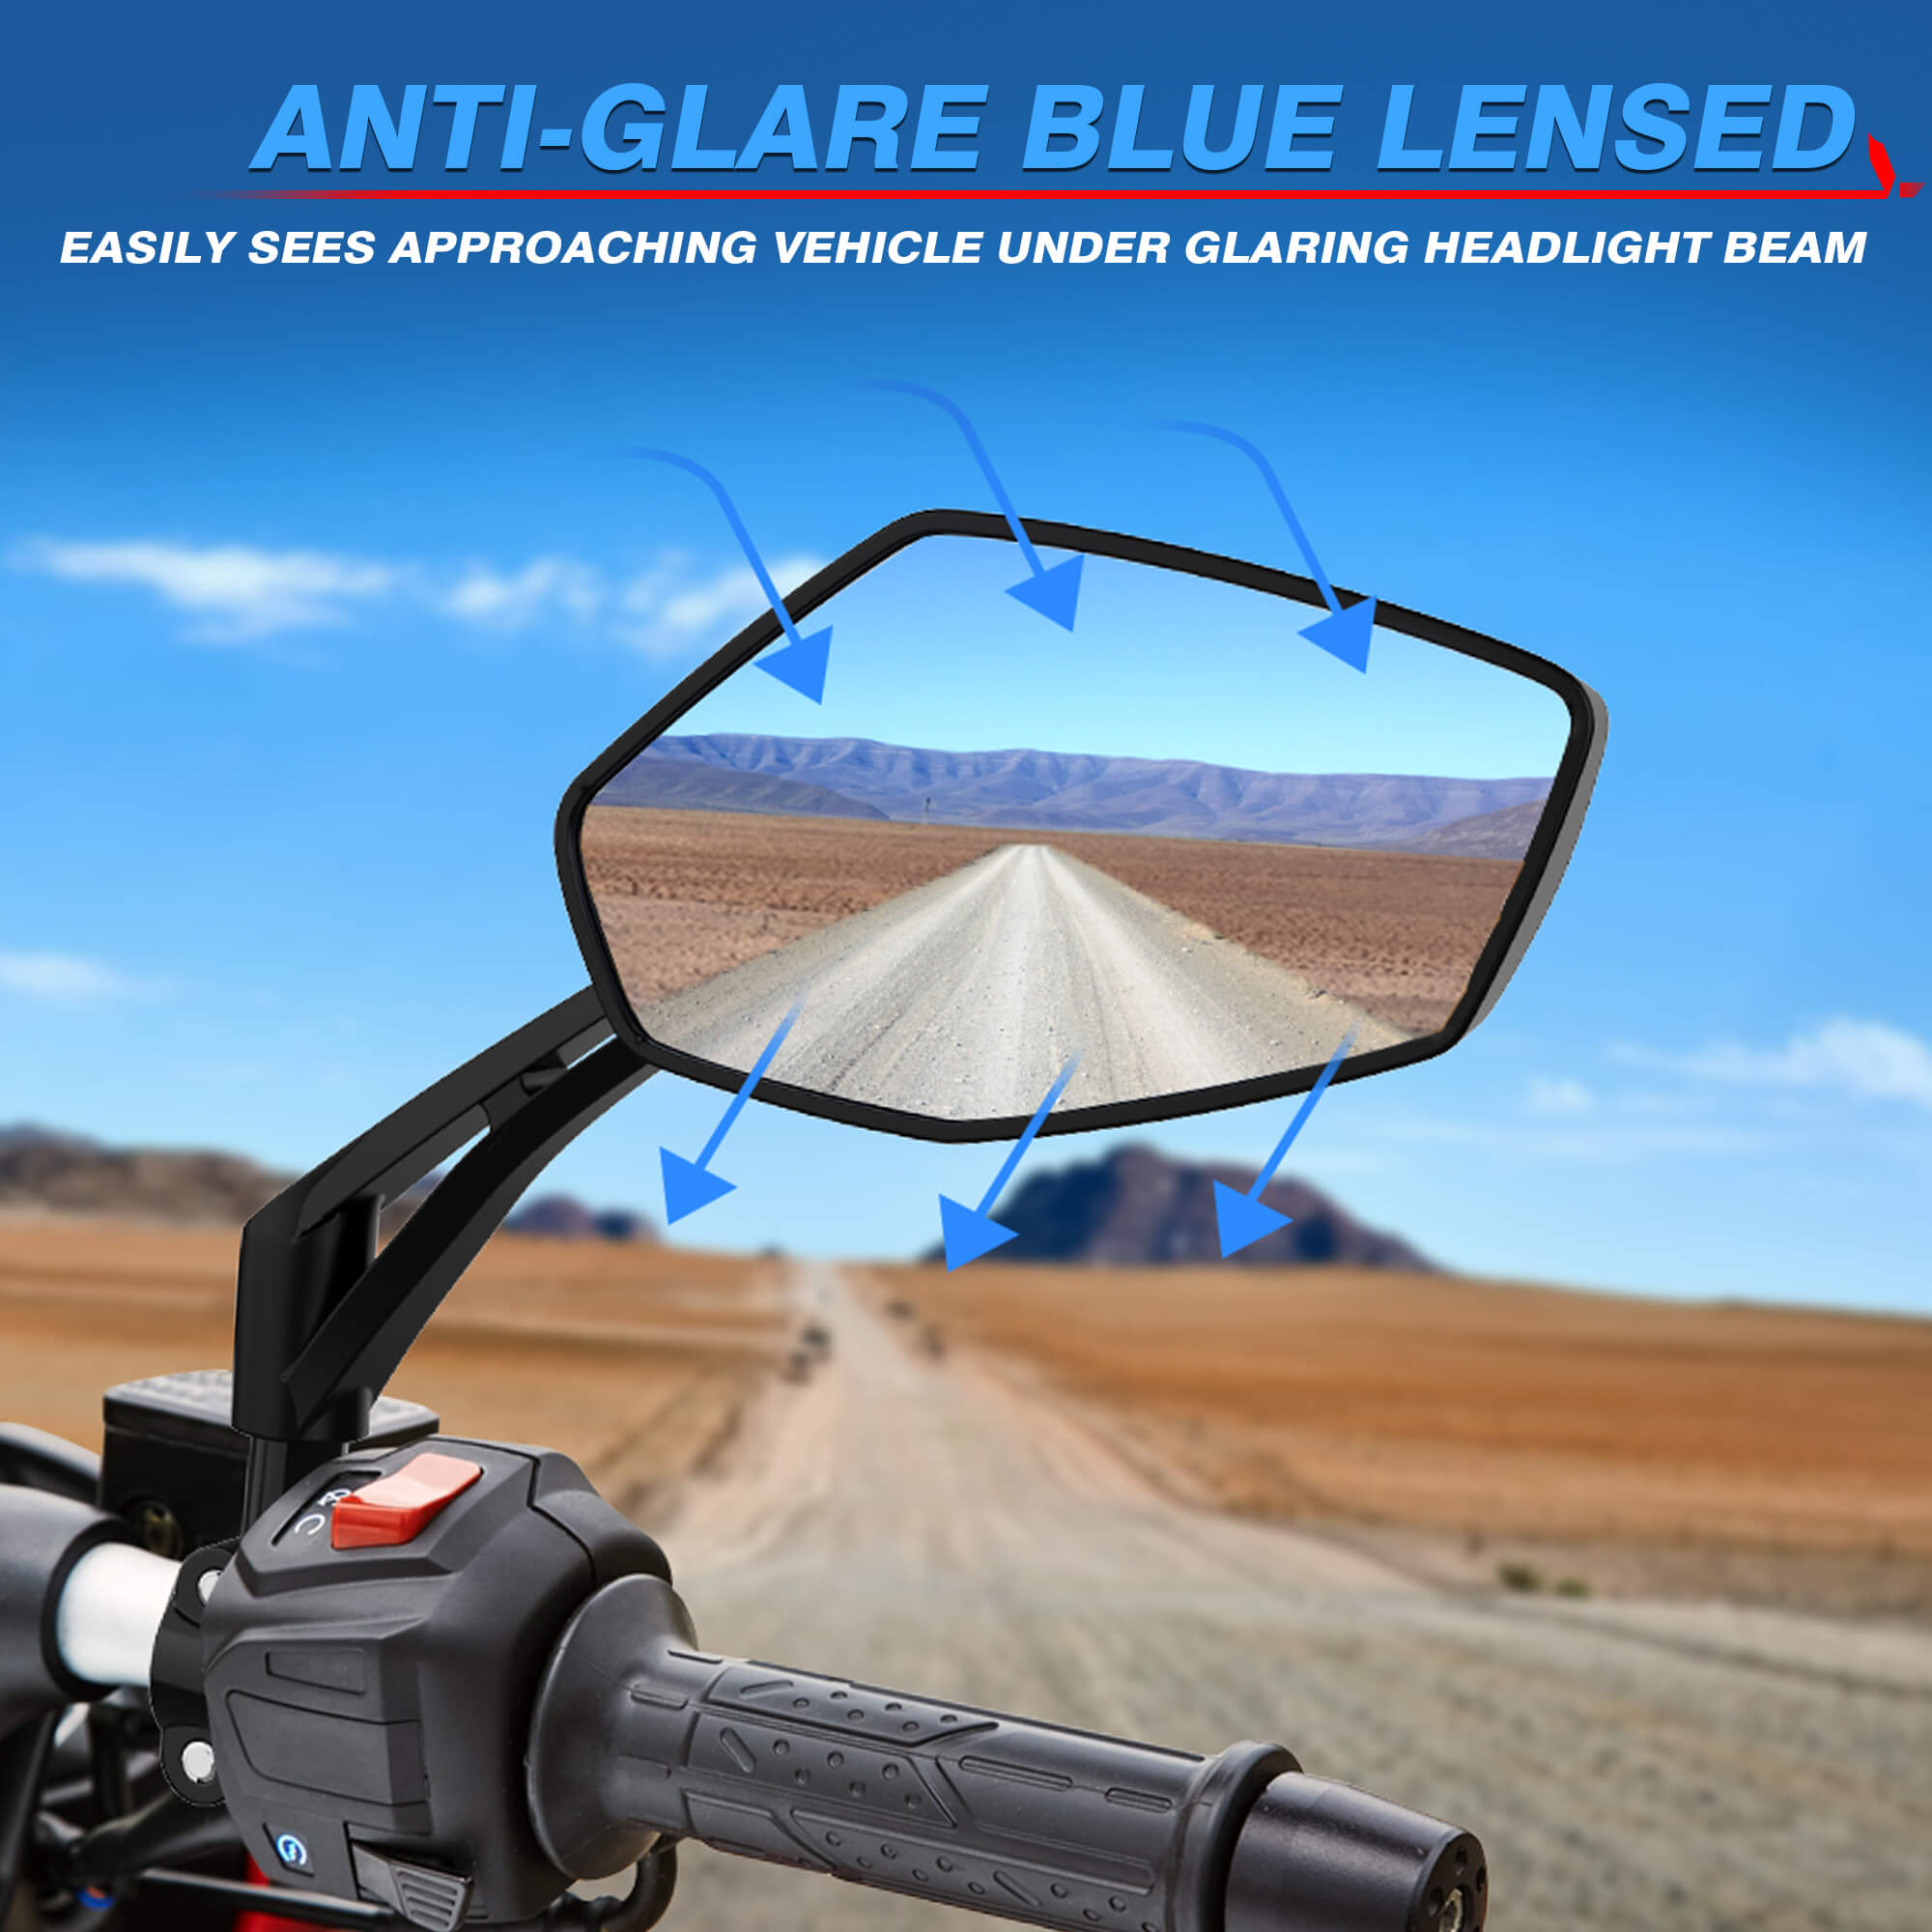 Motorcycle Rearview Mirrors Convex Blue Lens, Impact-Resistant ABS, 180° Rotation Adjustable- Fits M8 M10 Socket or 22mm Diameter Handlebar